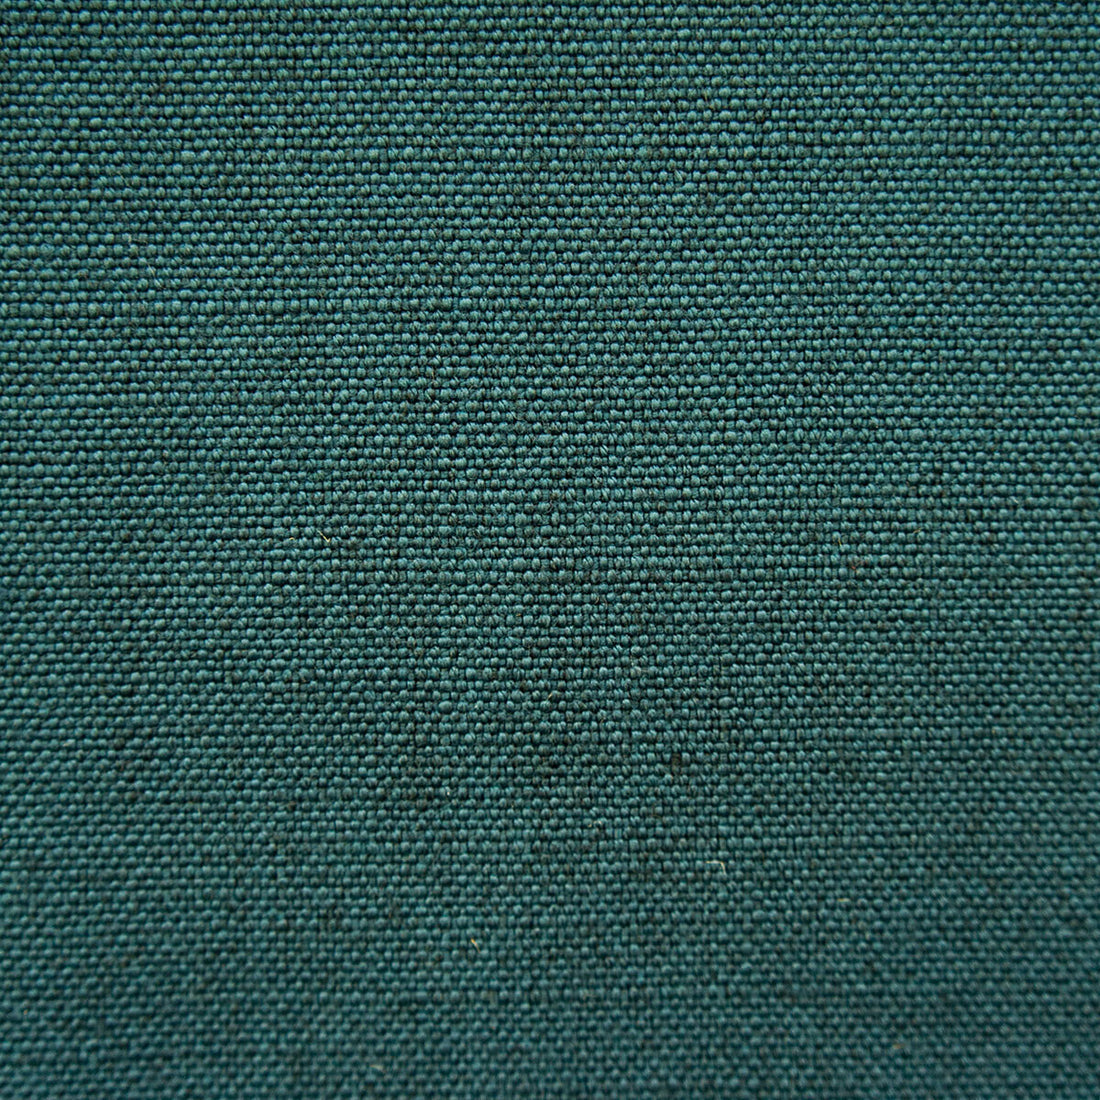 Kuu fabric in azul color - pattern GDT5632.013.0 - by Gaston y Daniela in the Gaston Japon collection